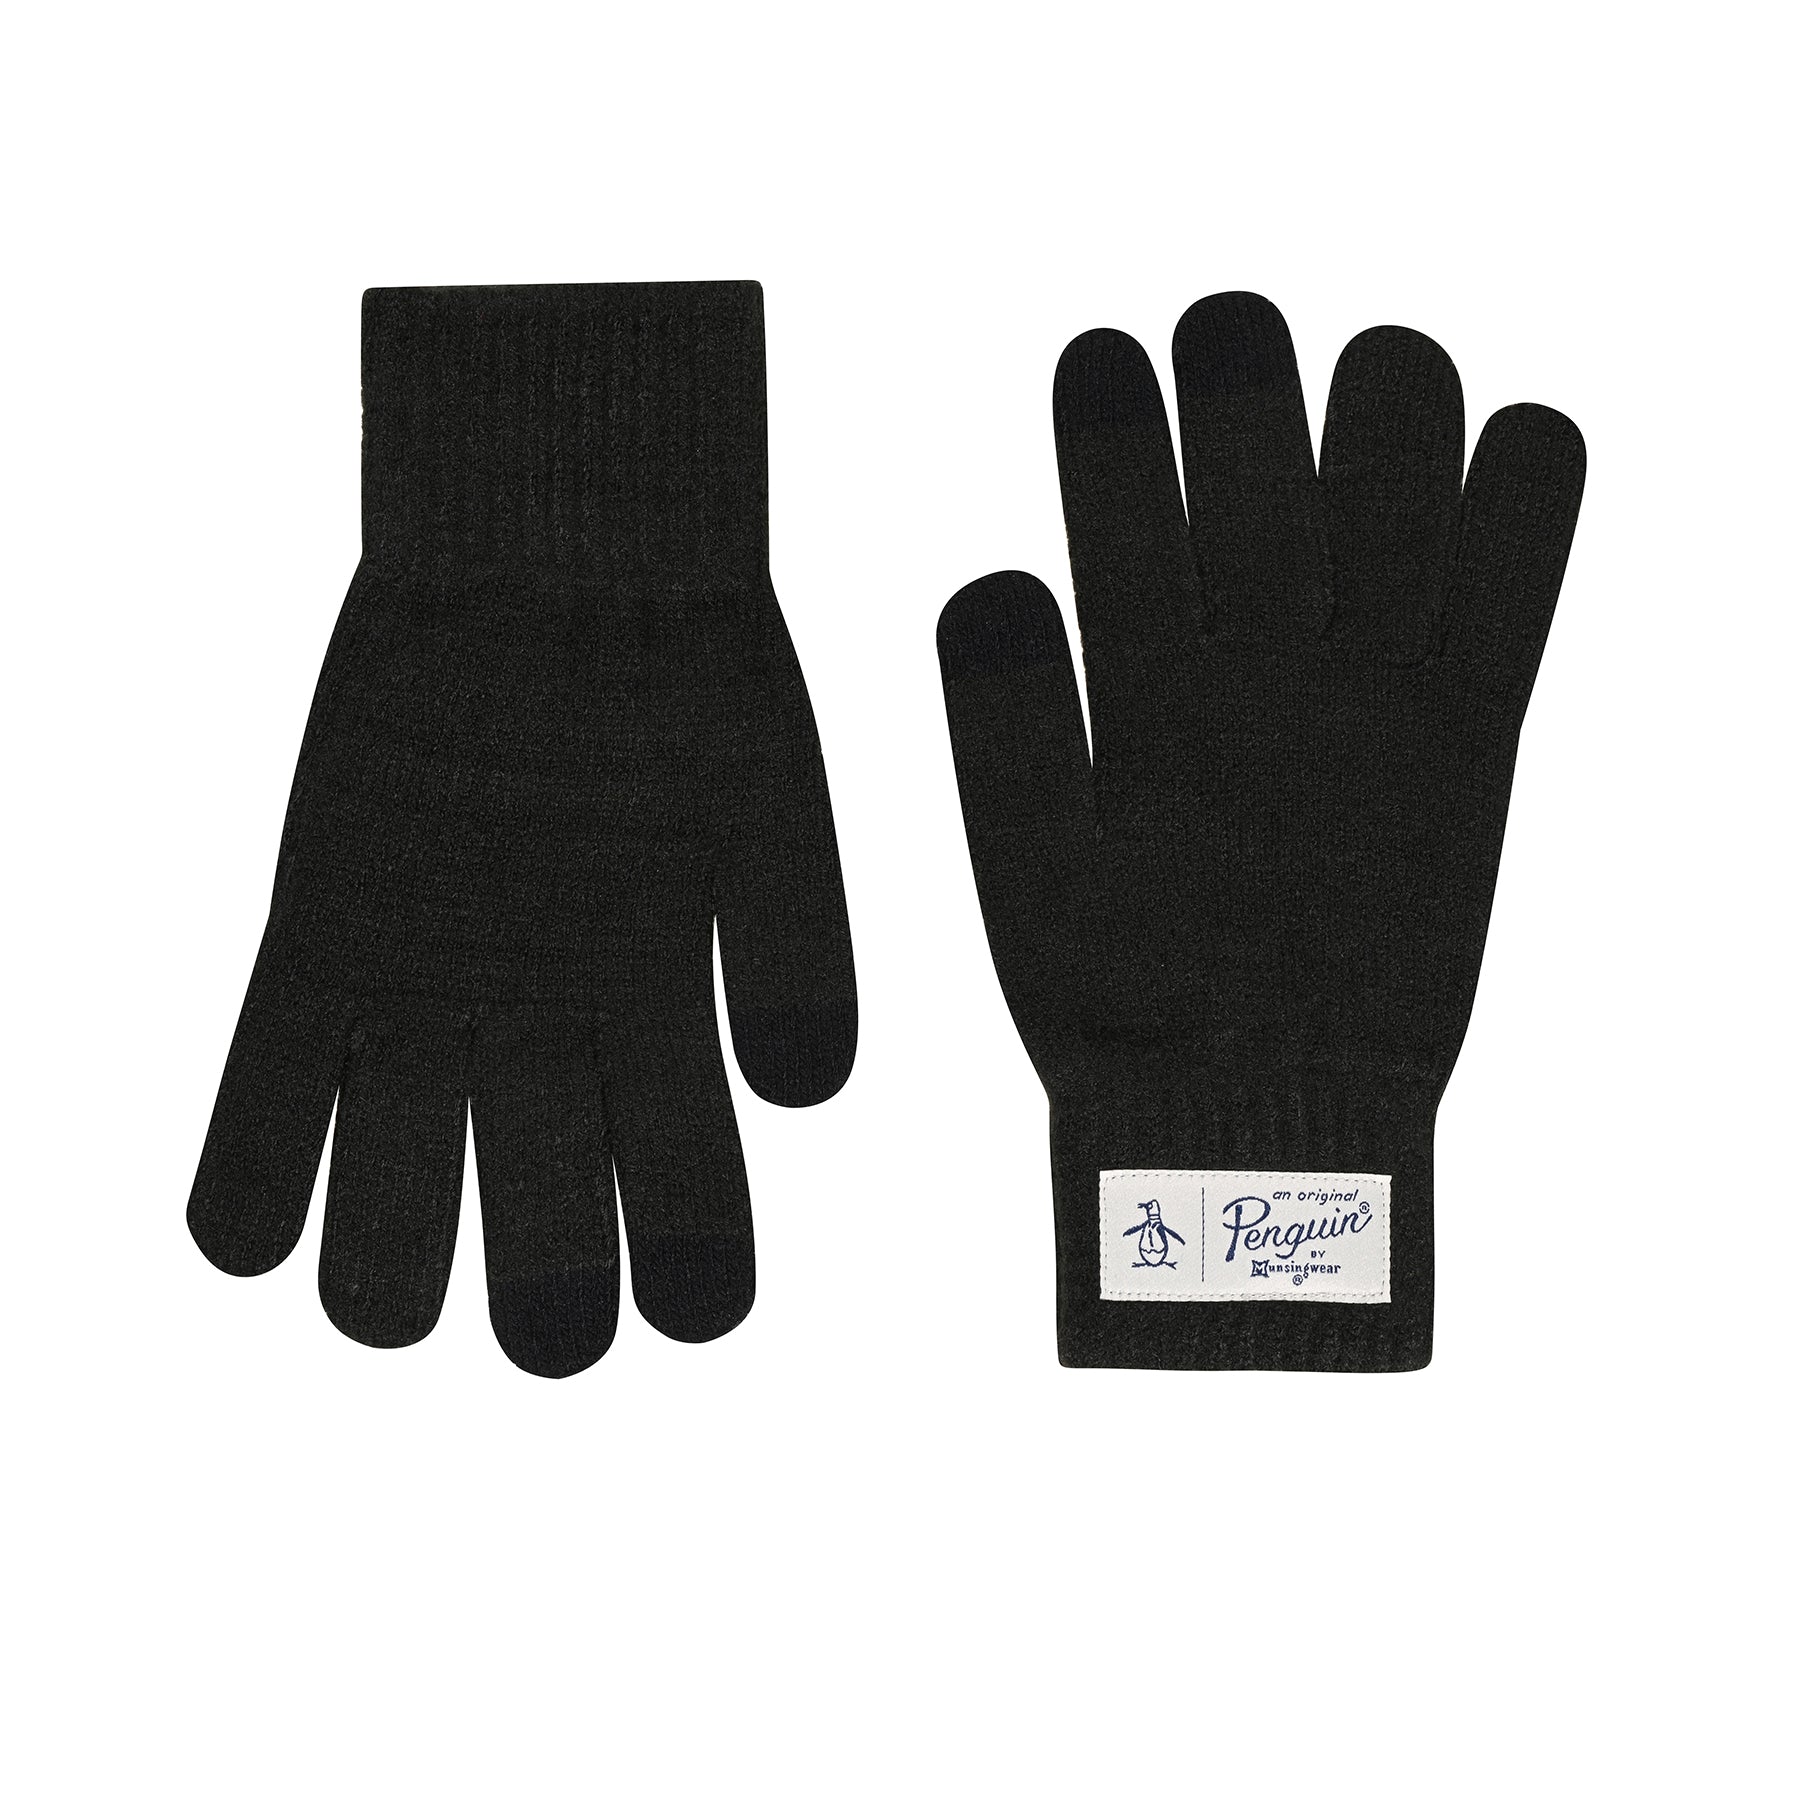 View Nathan Classic Knit Glove In Black In Black information